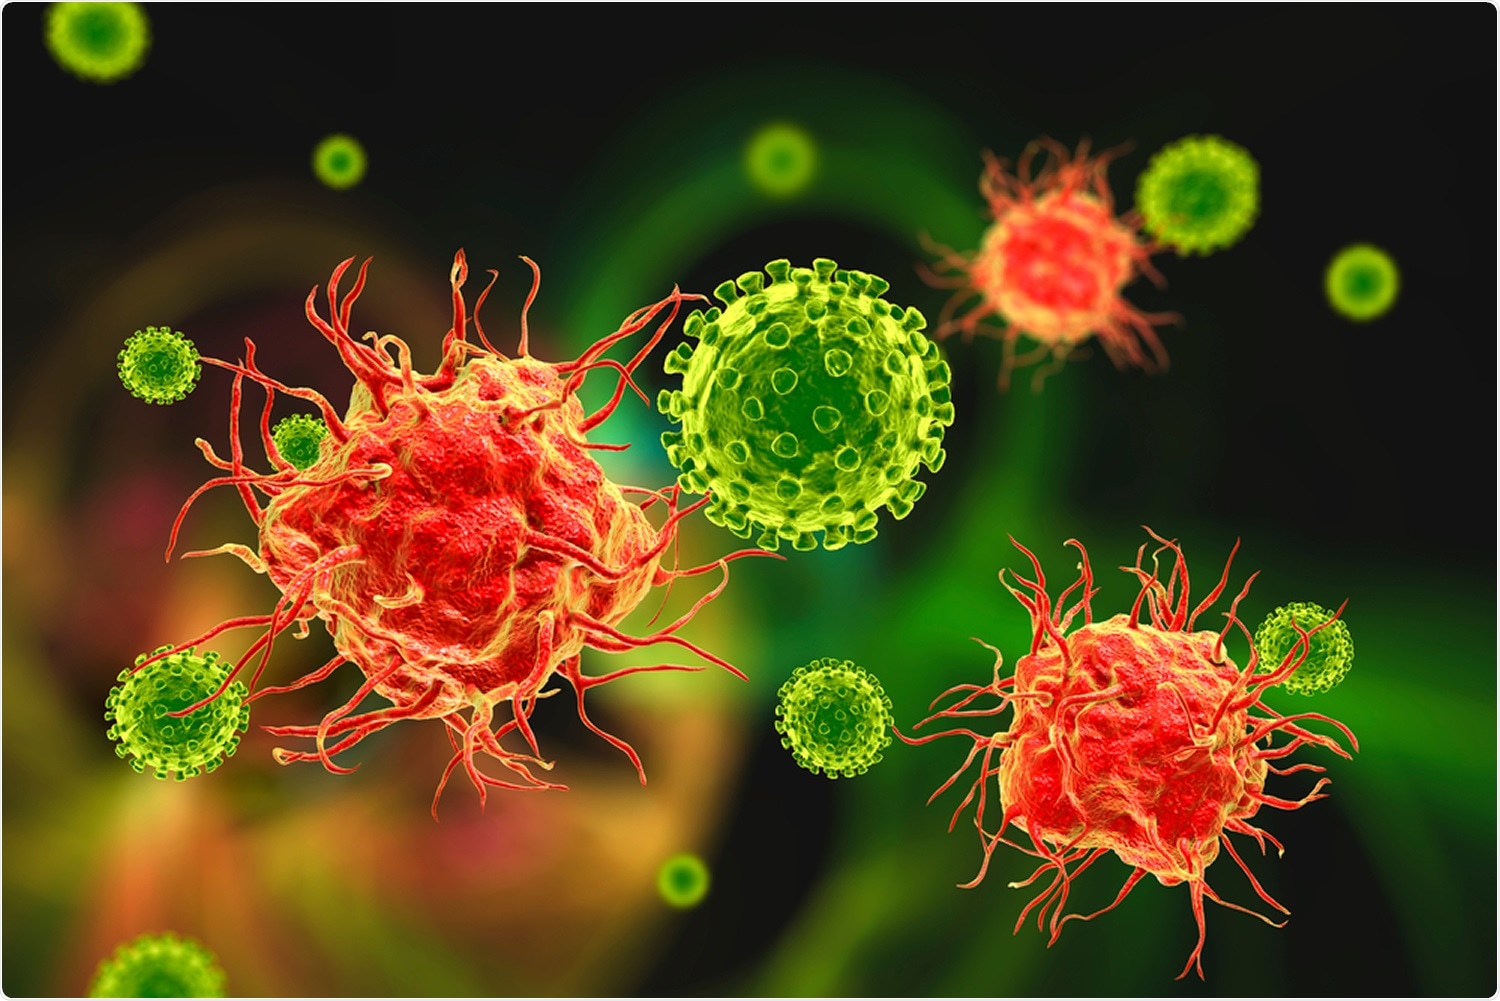 Study: SARS-CoV-2 infection activates dendritic cells via cytosolic receptors rather than extracellular TLRs. Image Credit: Kateryna Kon / Shutterstock